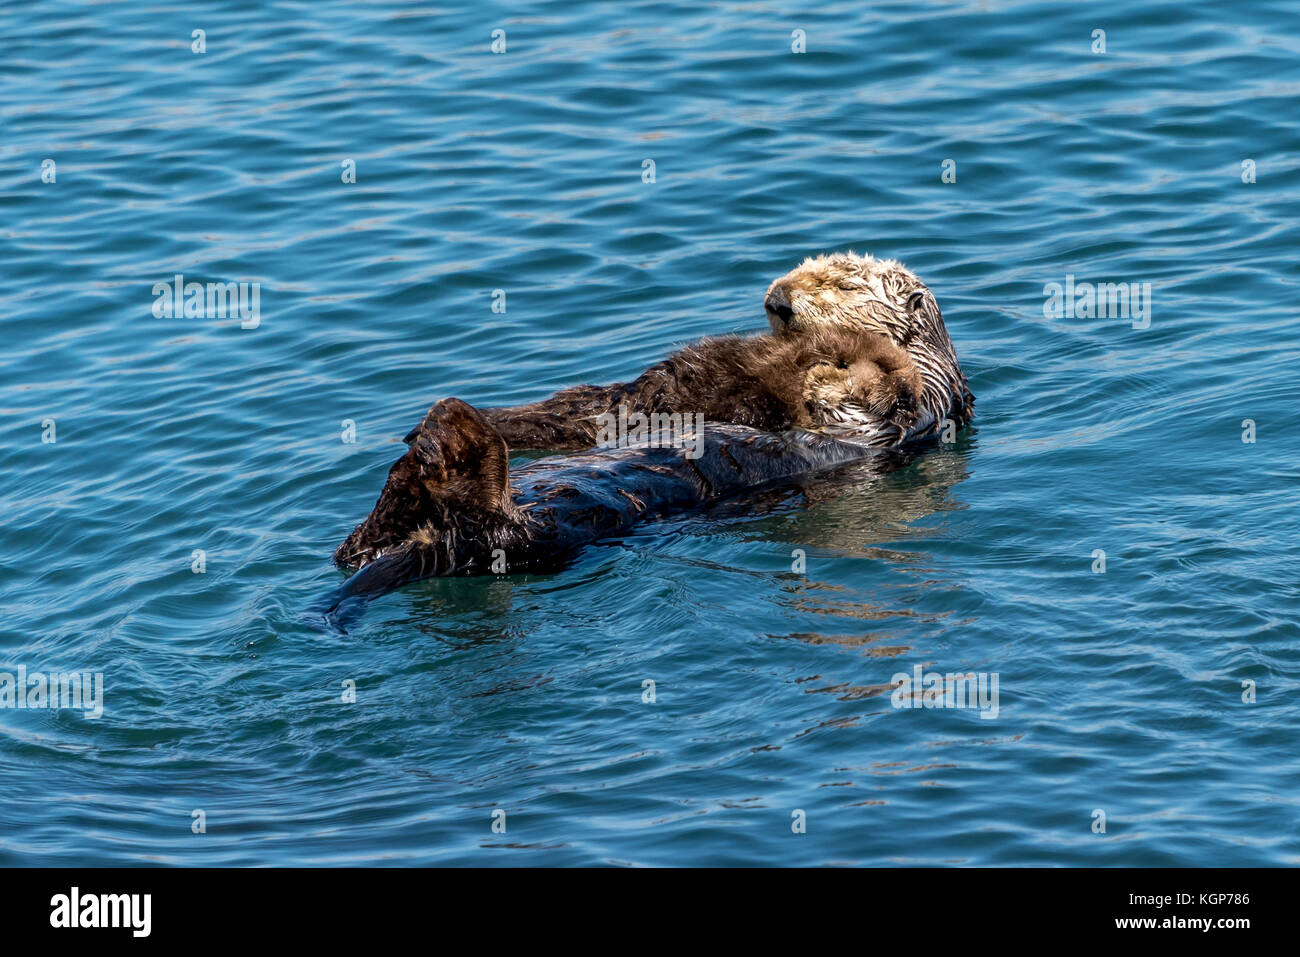 Cute baby sea otter sleeps on its mother's chest as they float in the water of Morro Bay, California,close up of mother and baby otter on blue water. Stock Photo